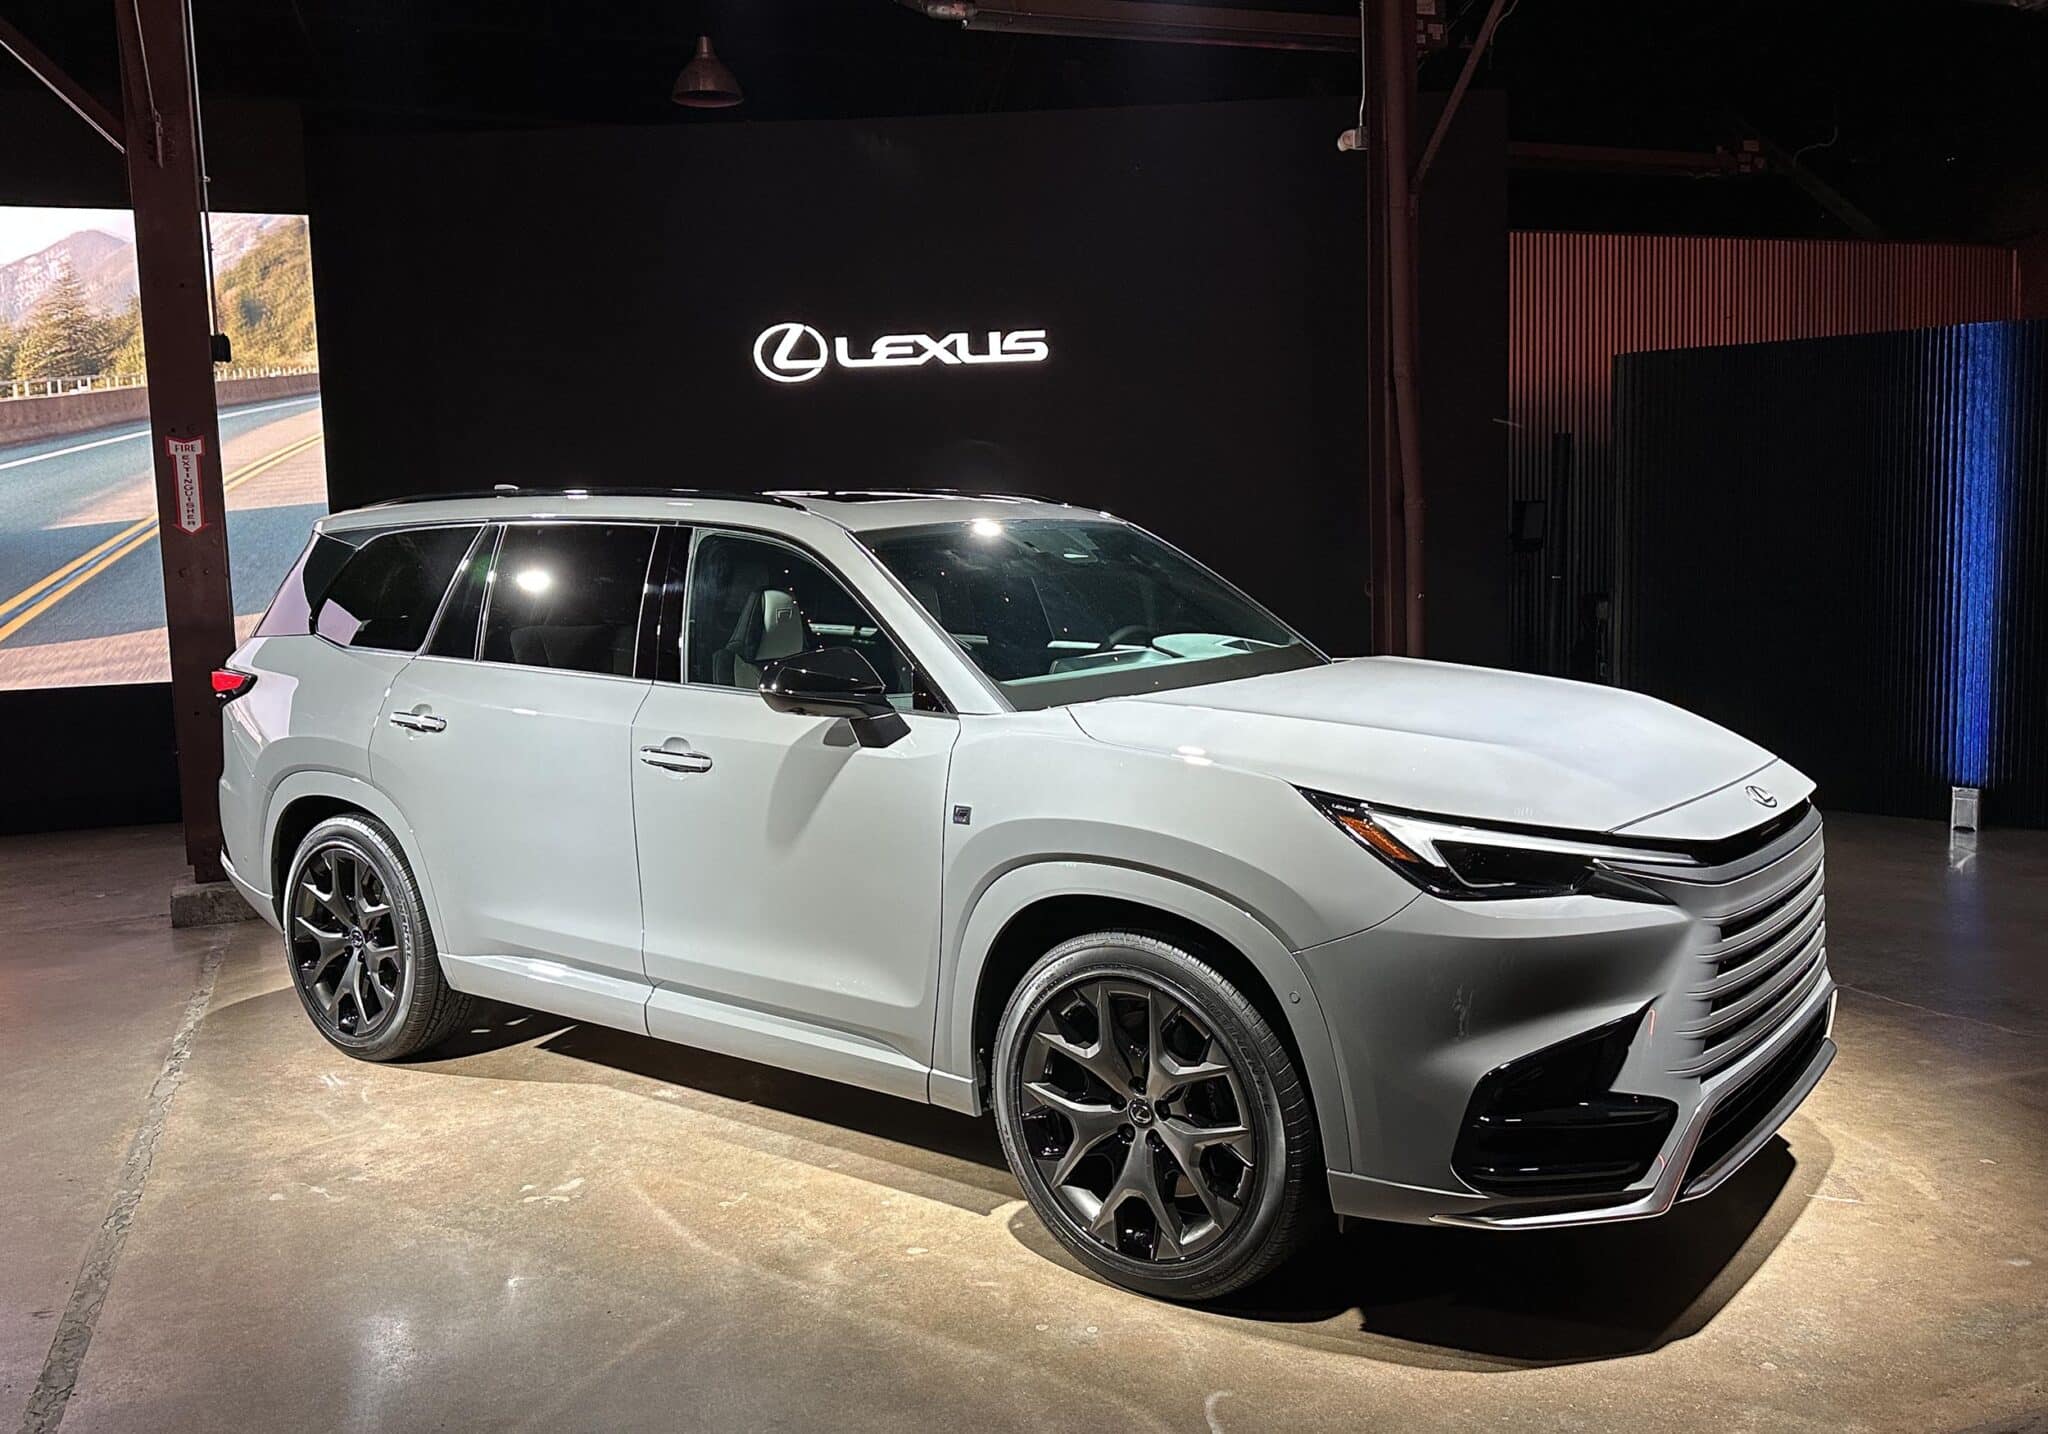 Lexus Lifts the Covers Off New, ThreeRow TX SUV The Detroit Bureau